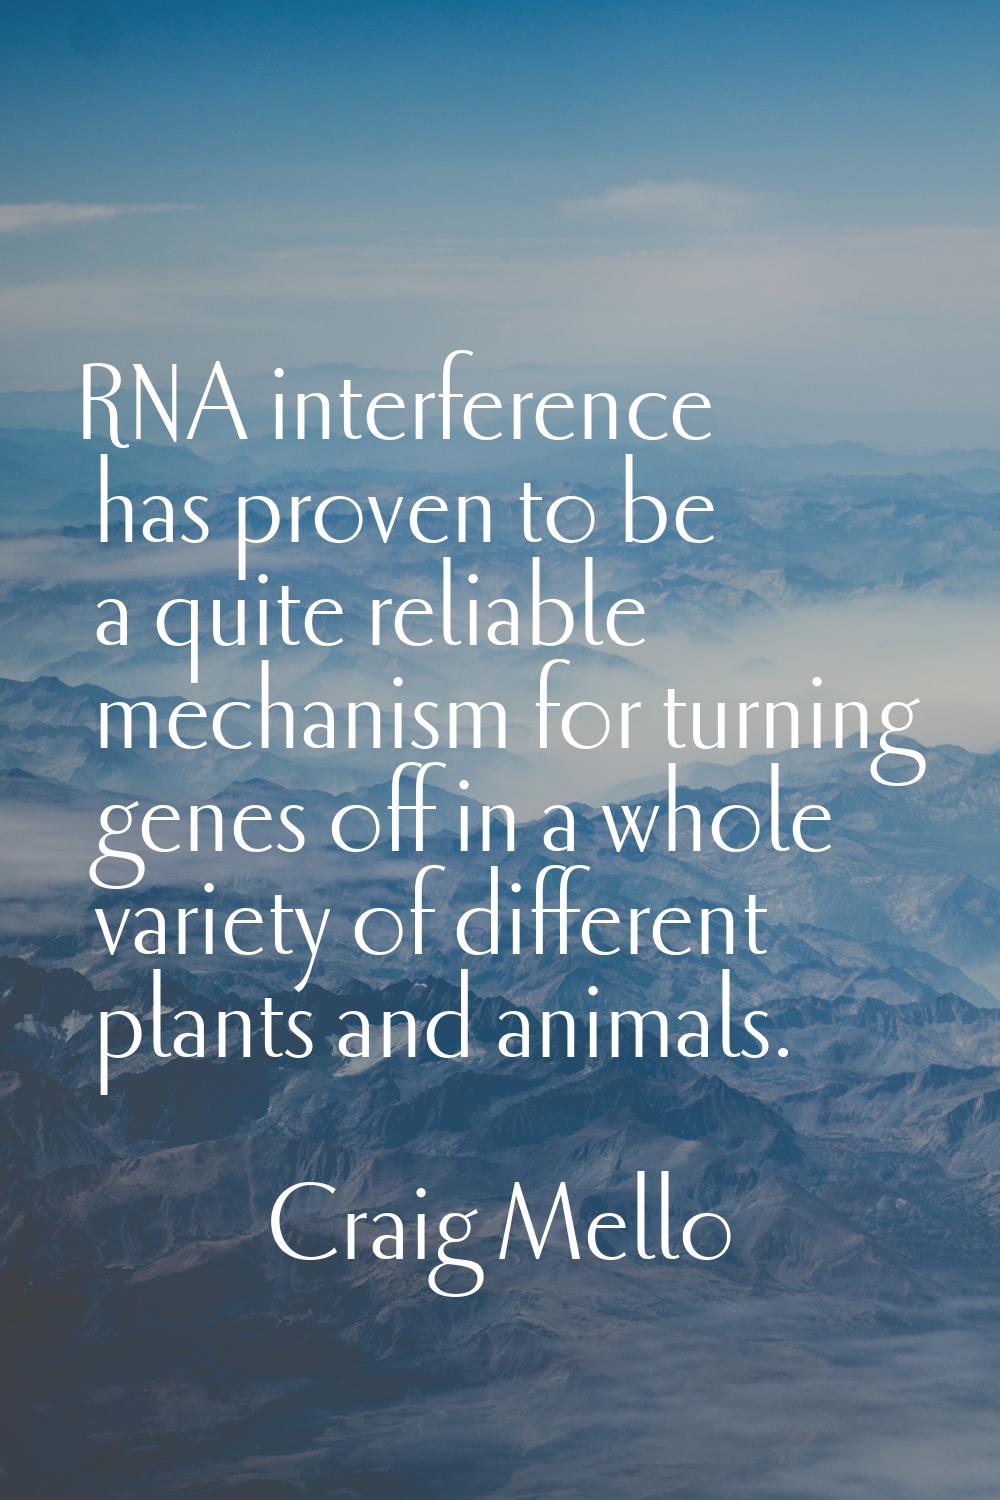 RNA interference has proven to be a quite reliable mechanism for turning genes off in a whole varie